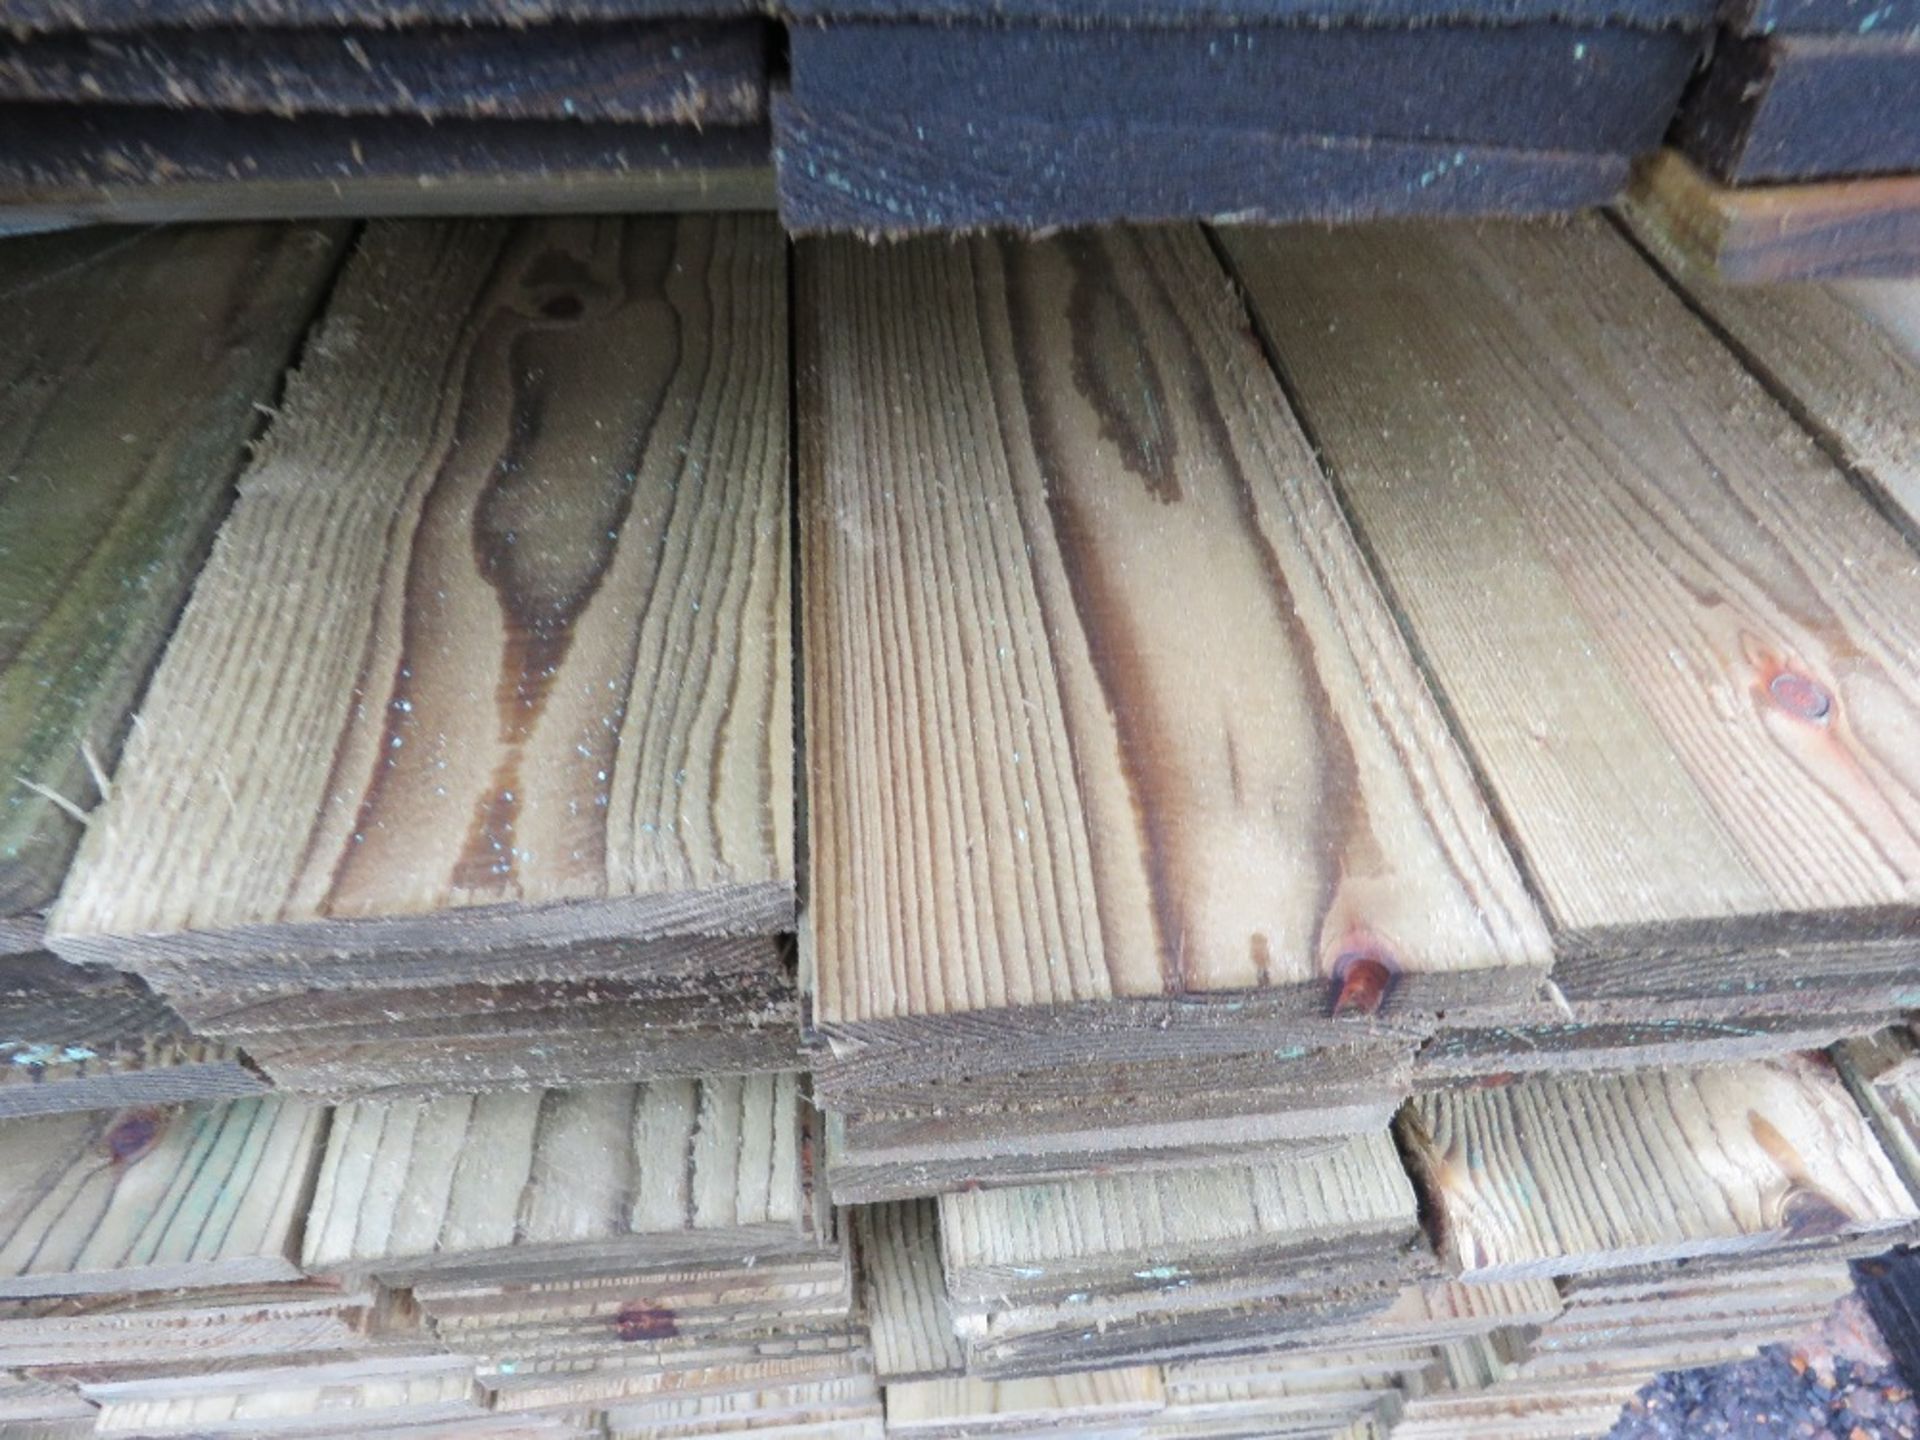 PACK OF TREATED FEATHER EDGE FENCE CLADDING BOARDS. 1.5M X 10CM APPROX. - Image 5 of 5